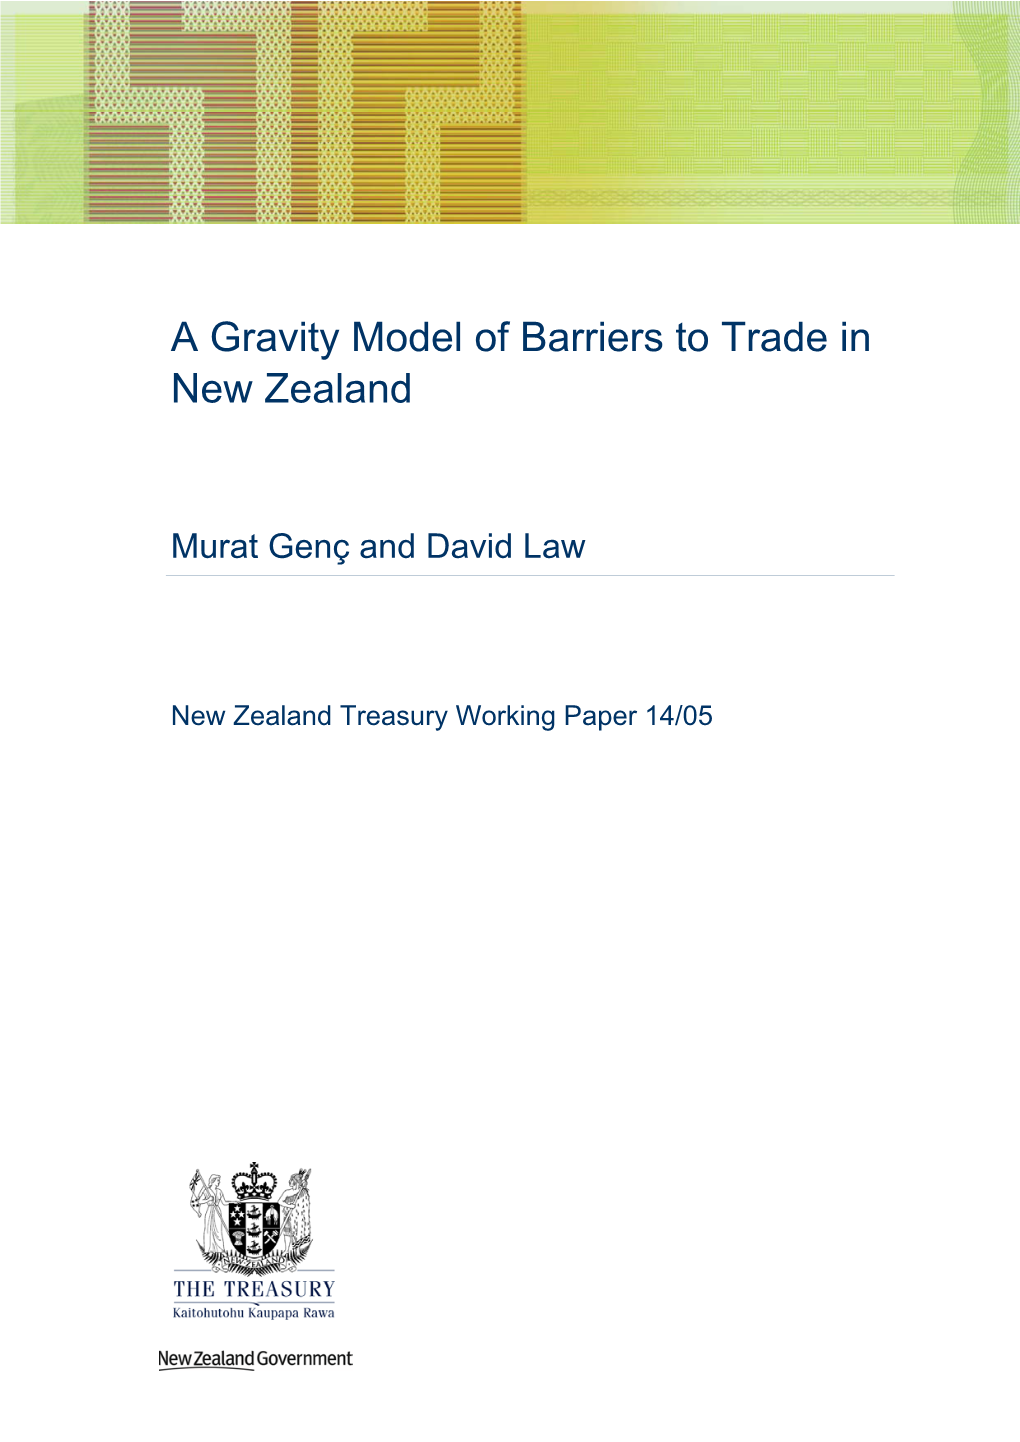 A Gravity Model of Barriers to Trade in New Zealand